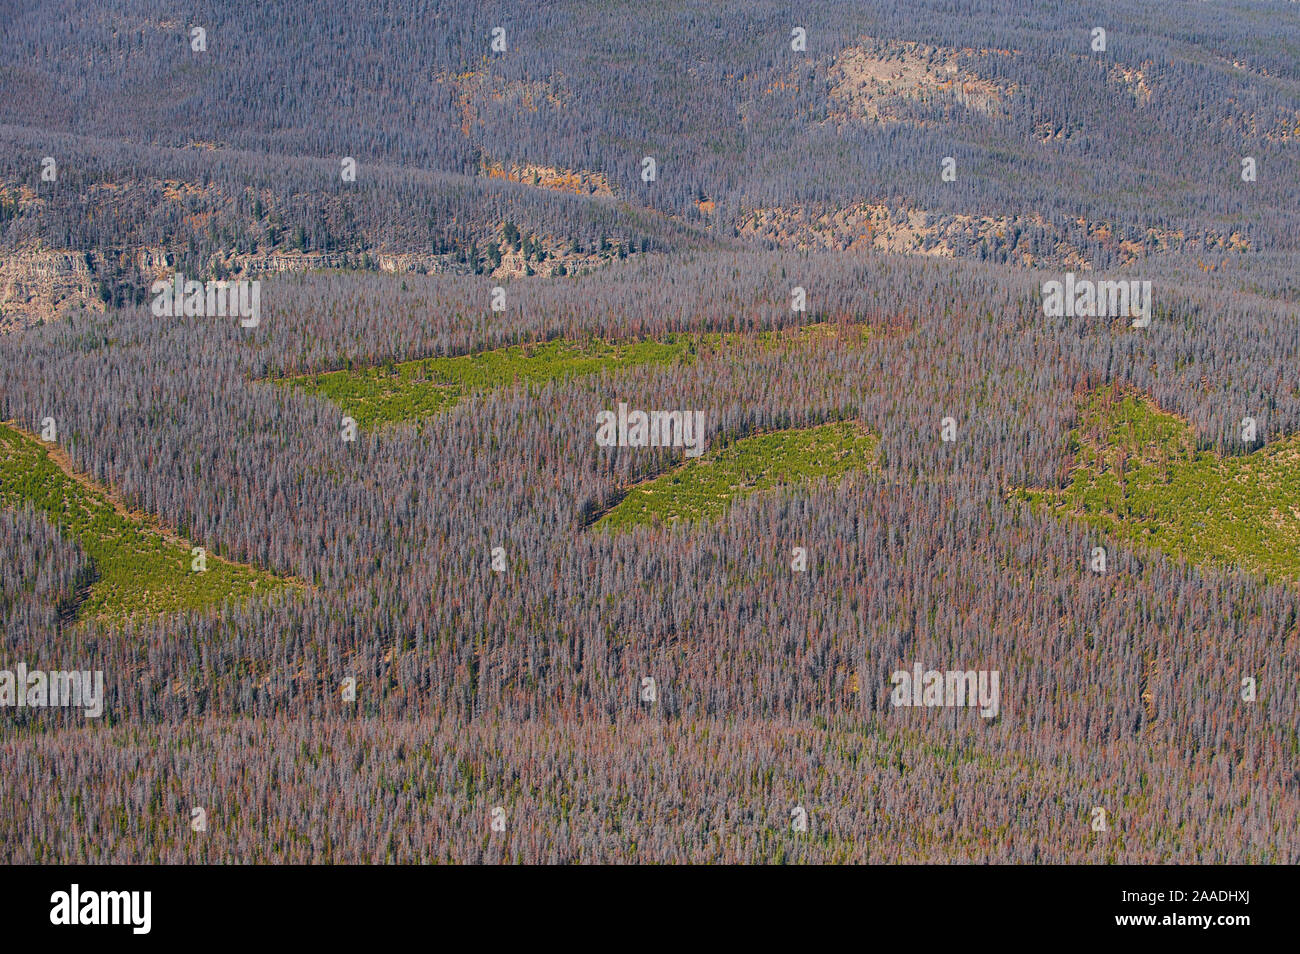 Aerial photograph of  Lodgepole Pine forest (Pinus contorta) with dead trees killed by Mountain pine beetle (Dendroctonud ponderosae)  Clear cut areas only have young trees. Granby, Colorado, USA. October The current outbreak of mountain pine beetles has been particularly aggressive. This is due to climate change, monoculture planting of trees and fire suppression. Stock Photo